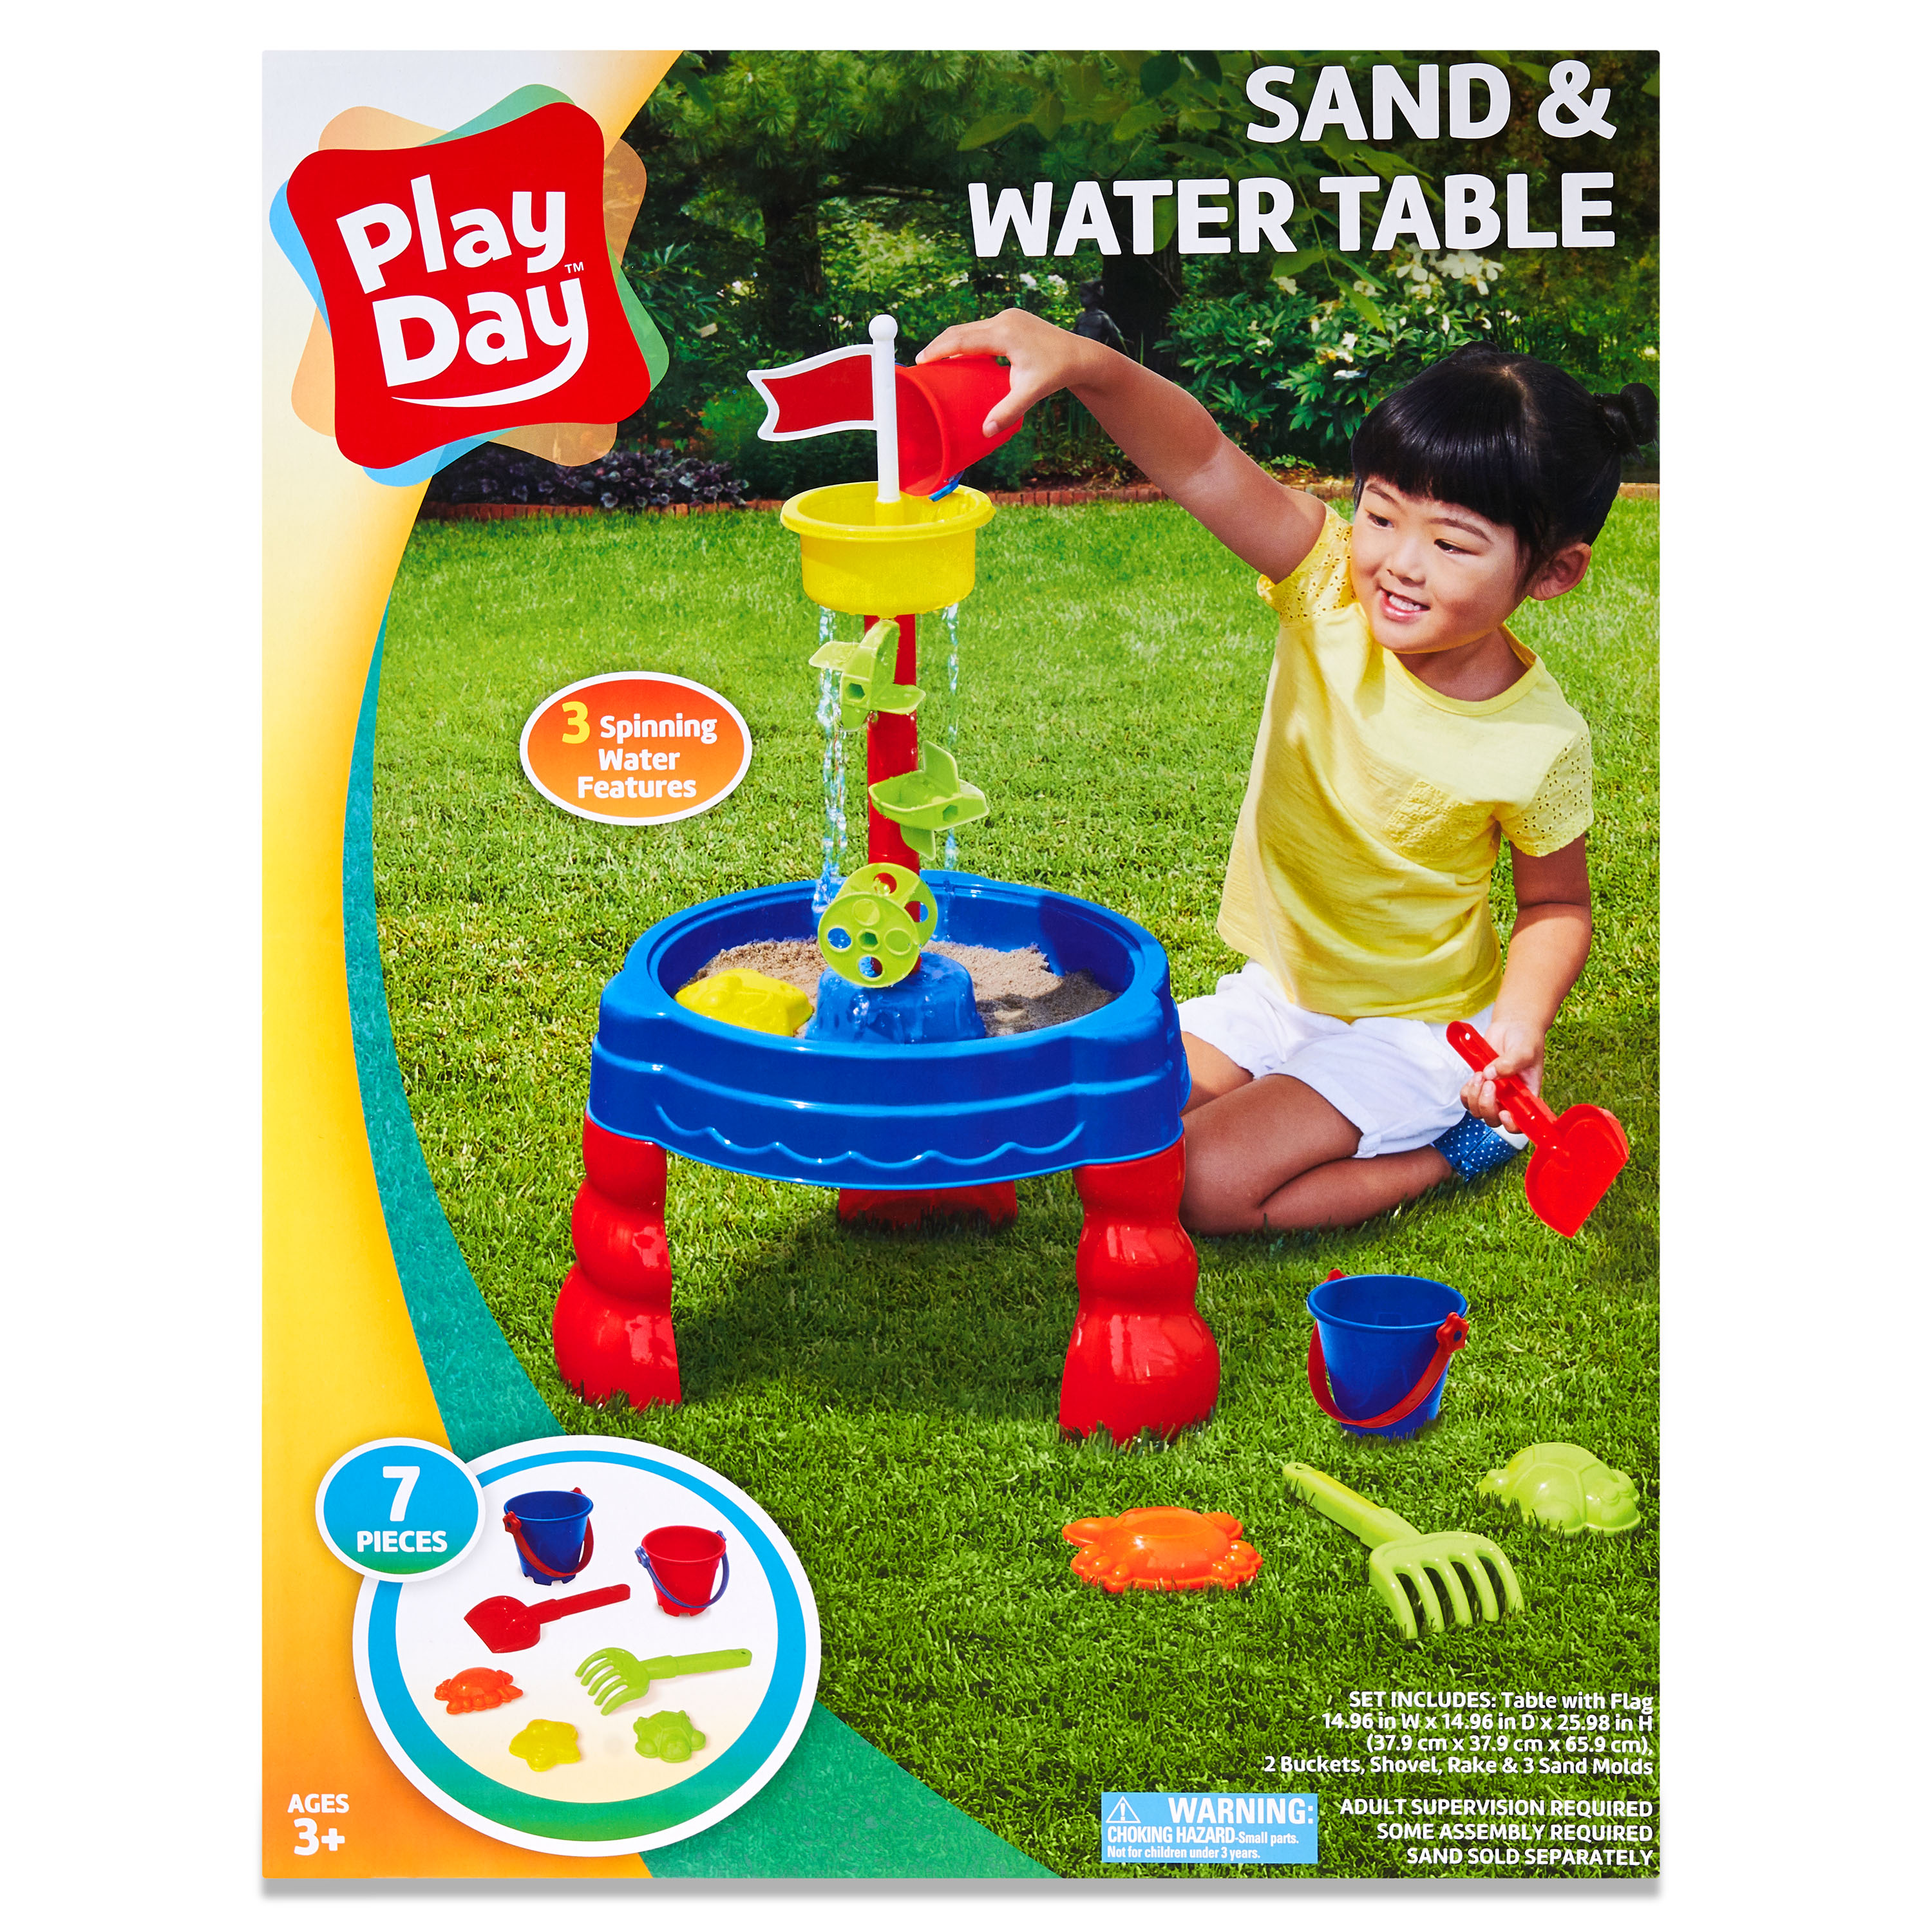 Play Day Sand & Water Table - Creative Toy for Children Ages 3+ - image 3 of 5